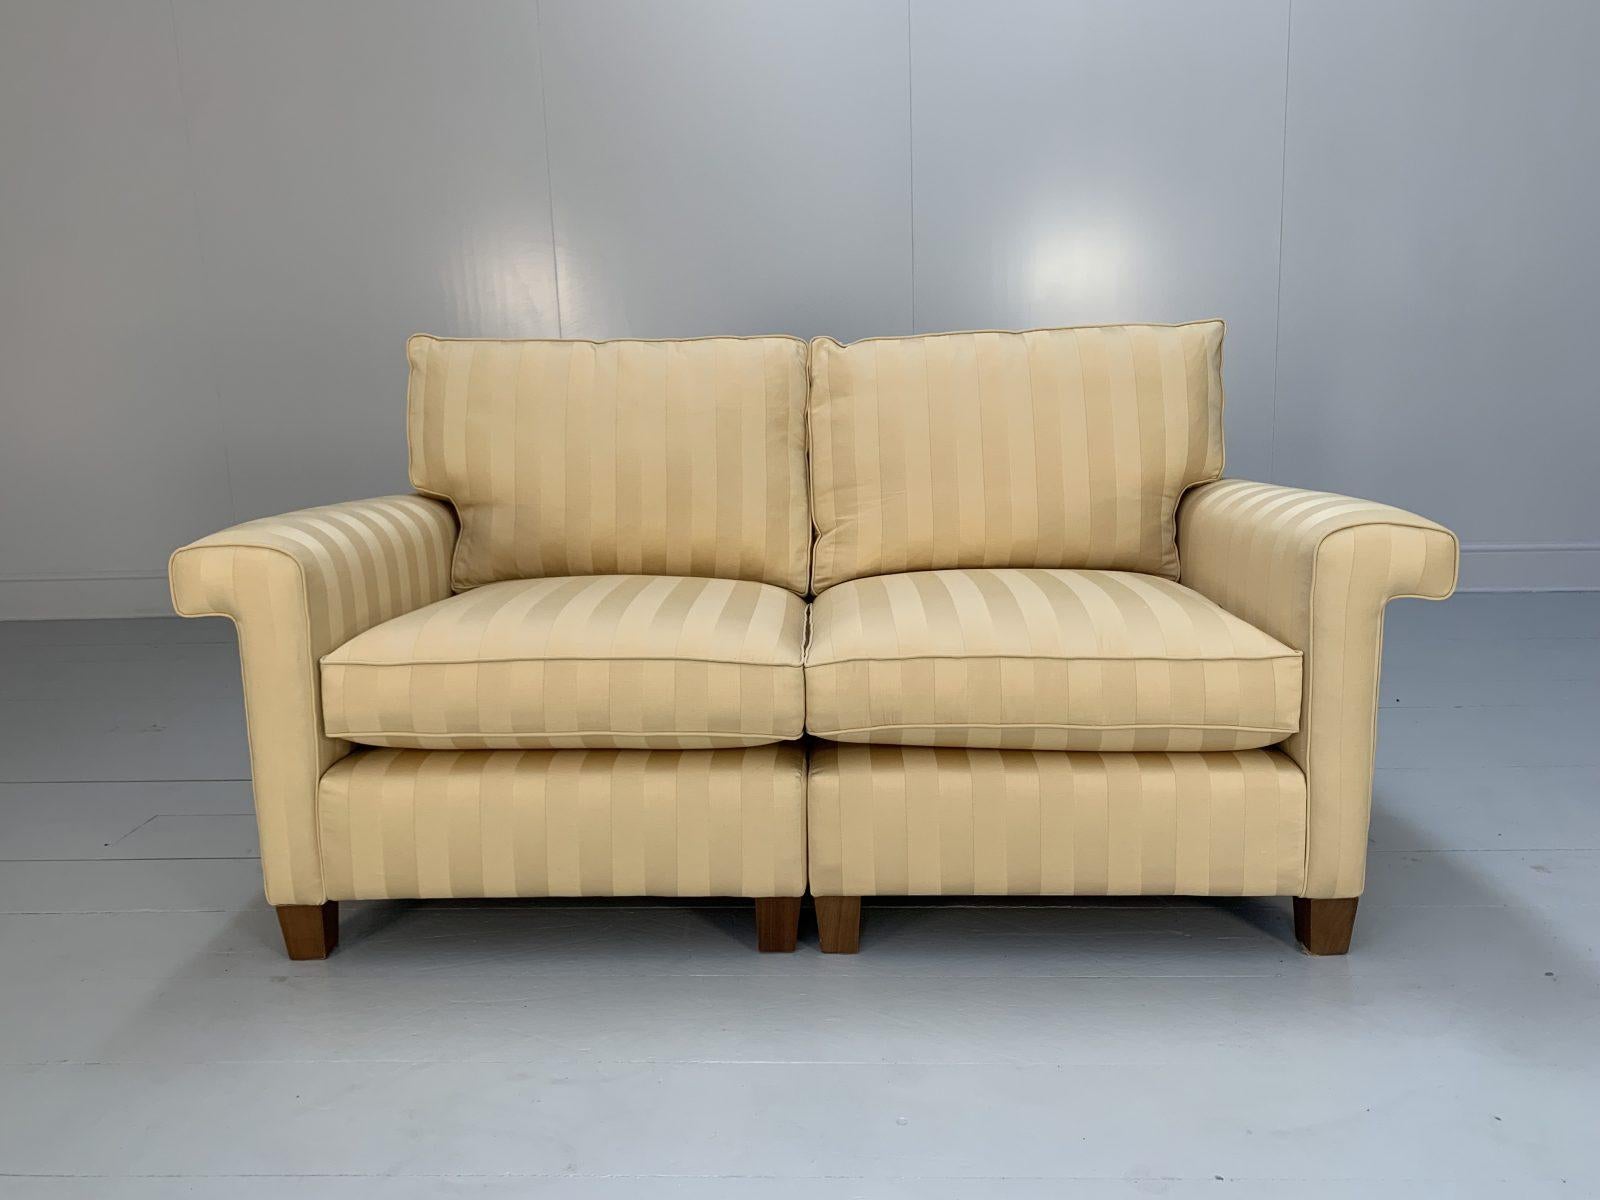 Hello Friends, and welcome to another unmissable offering from Lord Browns Furniture, the UK’s premier resource for fine Sofas and Chairs.

On offer on this occasion is a superb, majestic Duresta “Gabrielle” Cushion-Back 2.5-Seat Sofa, dressed in